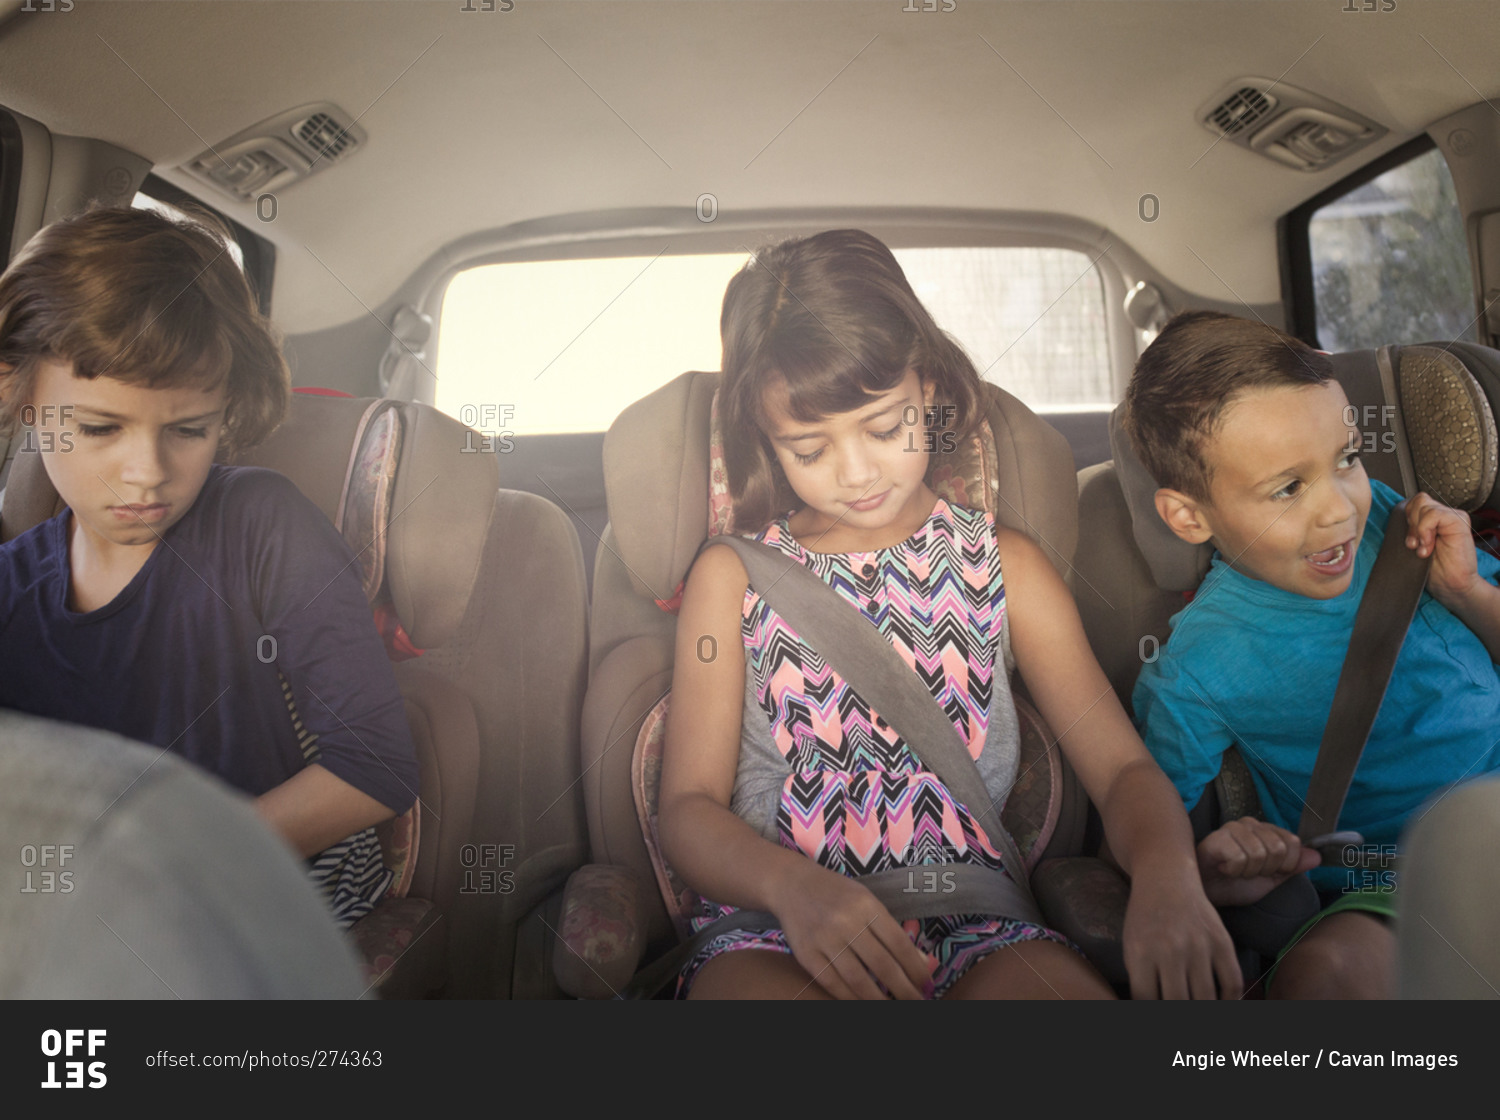 Children in child seats riding in a car